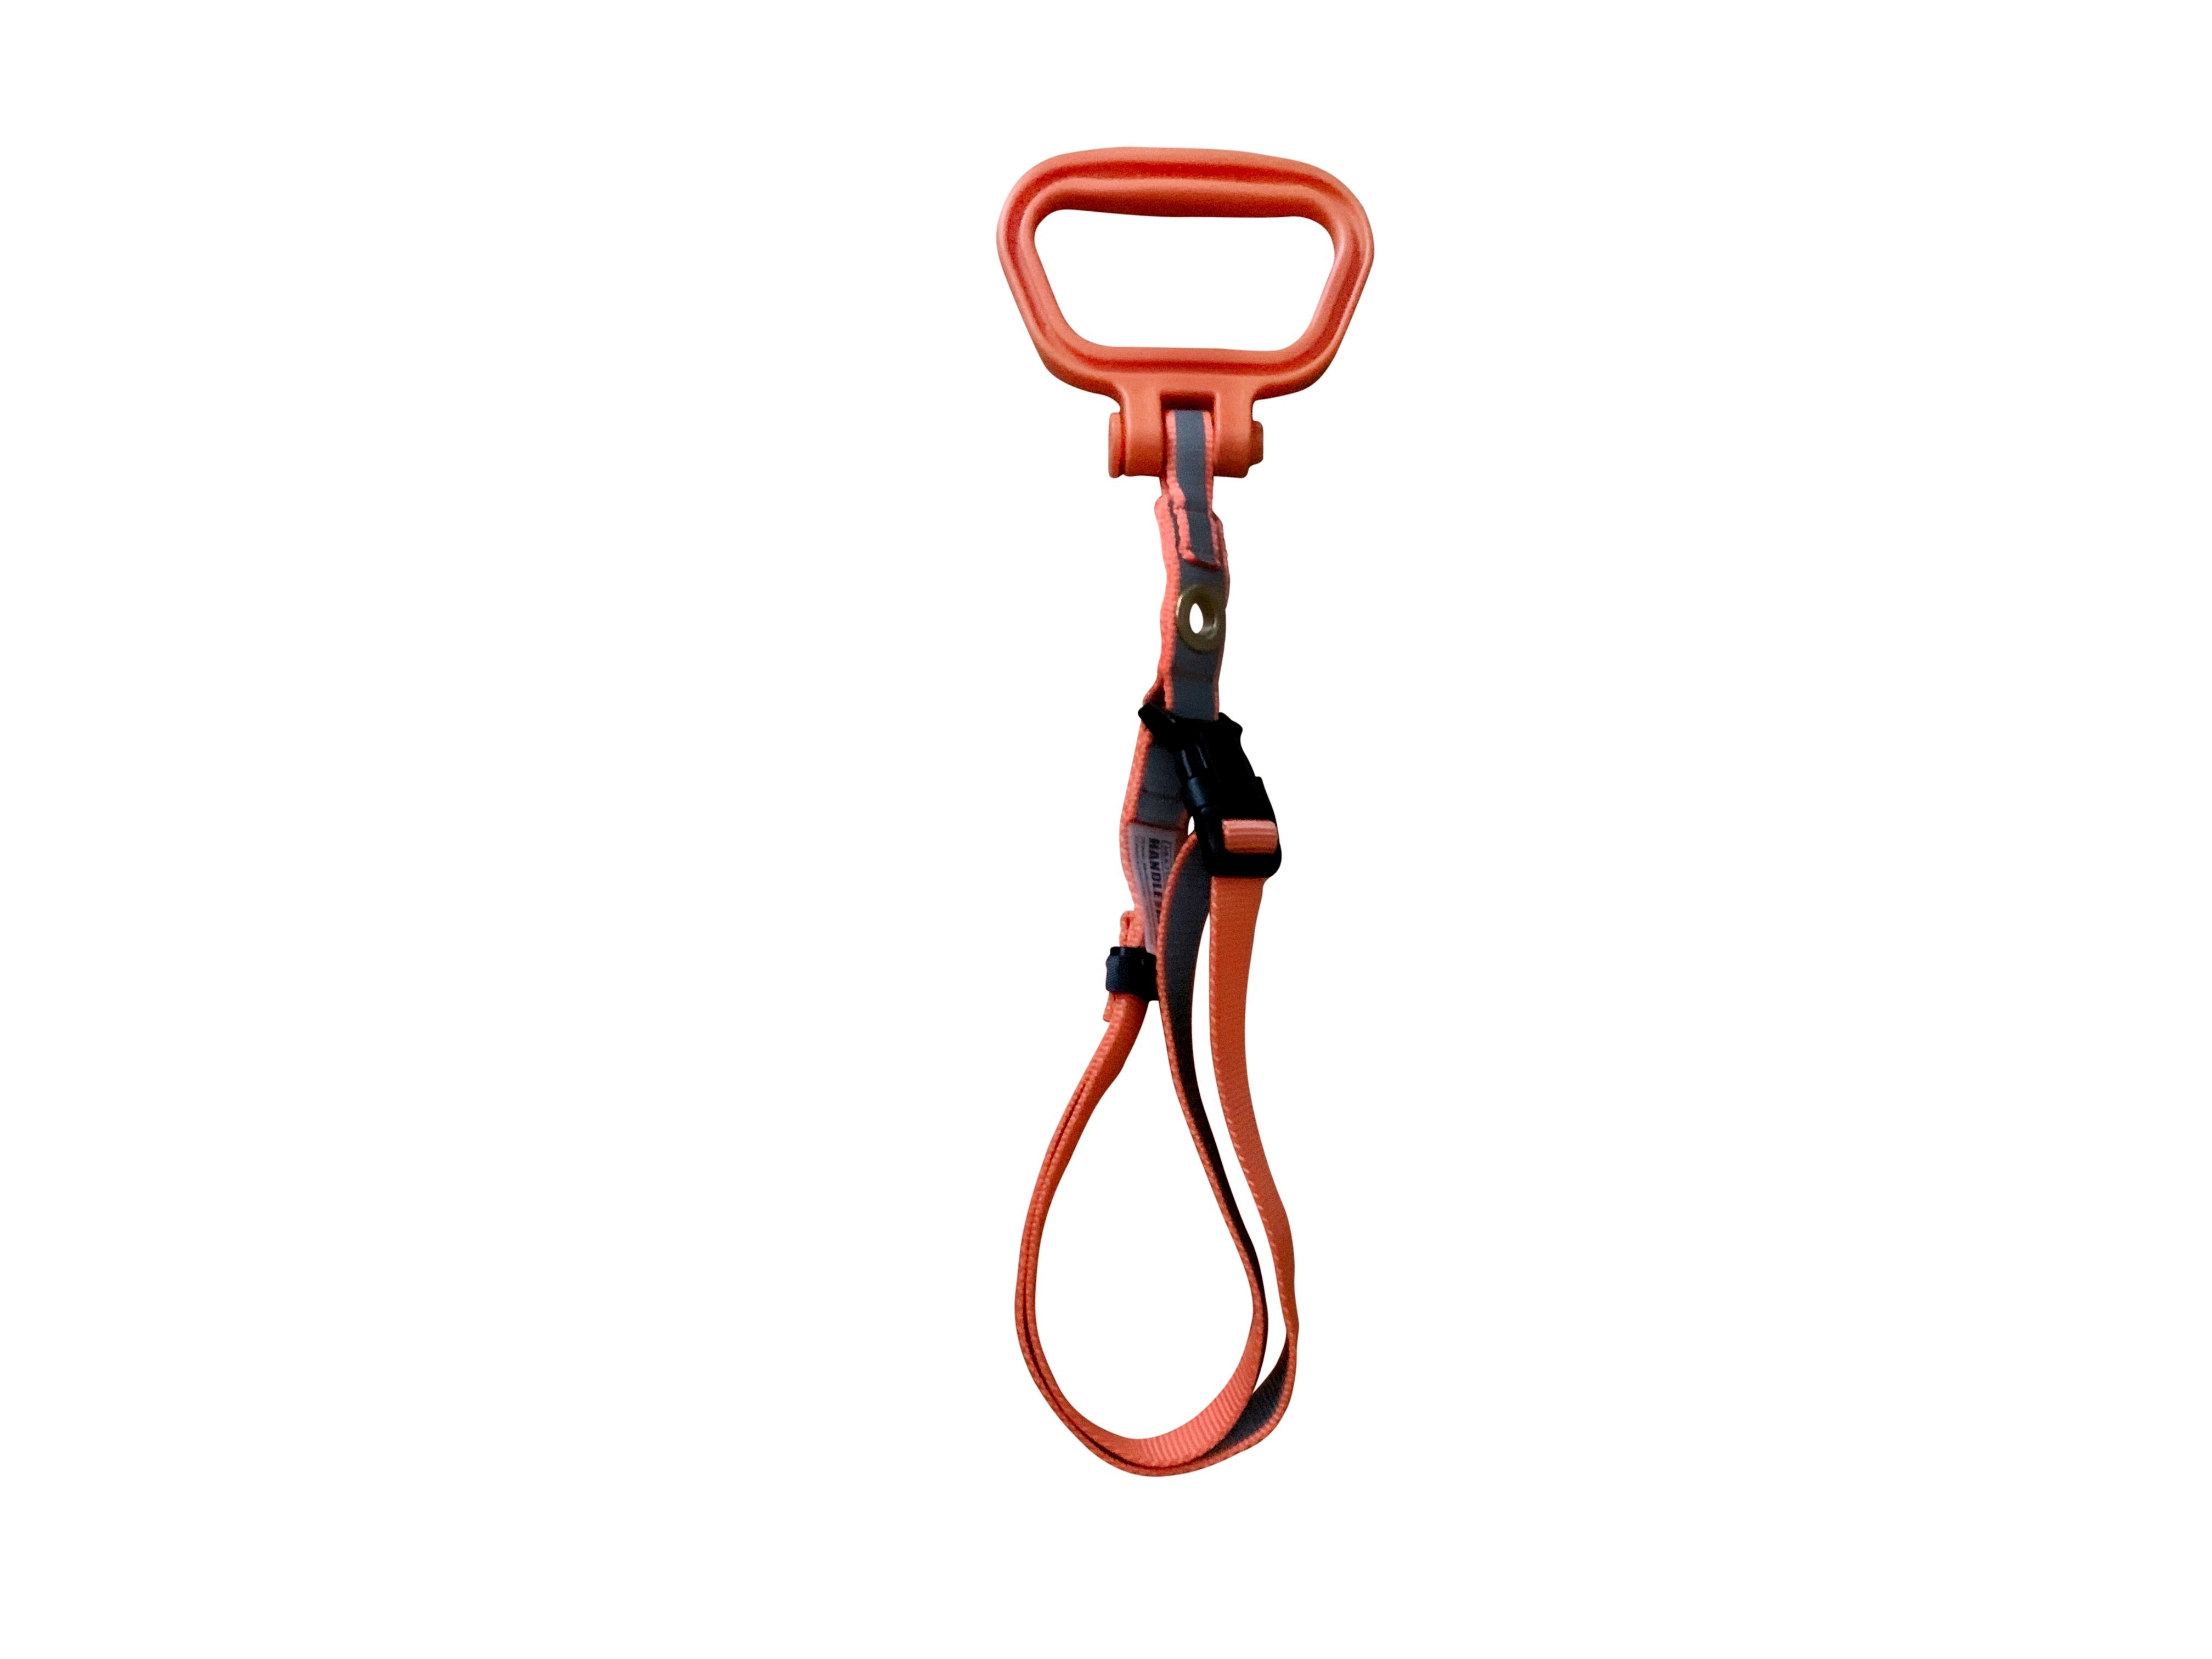 Carry and Storage Hook & Loop Strap - MULTUS: Moving Straps, Drag